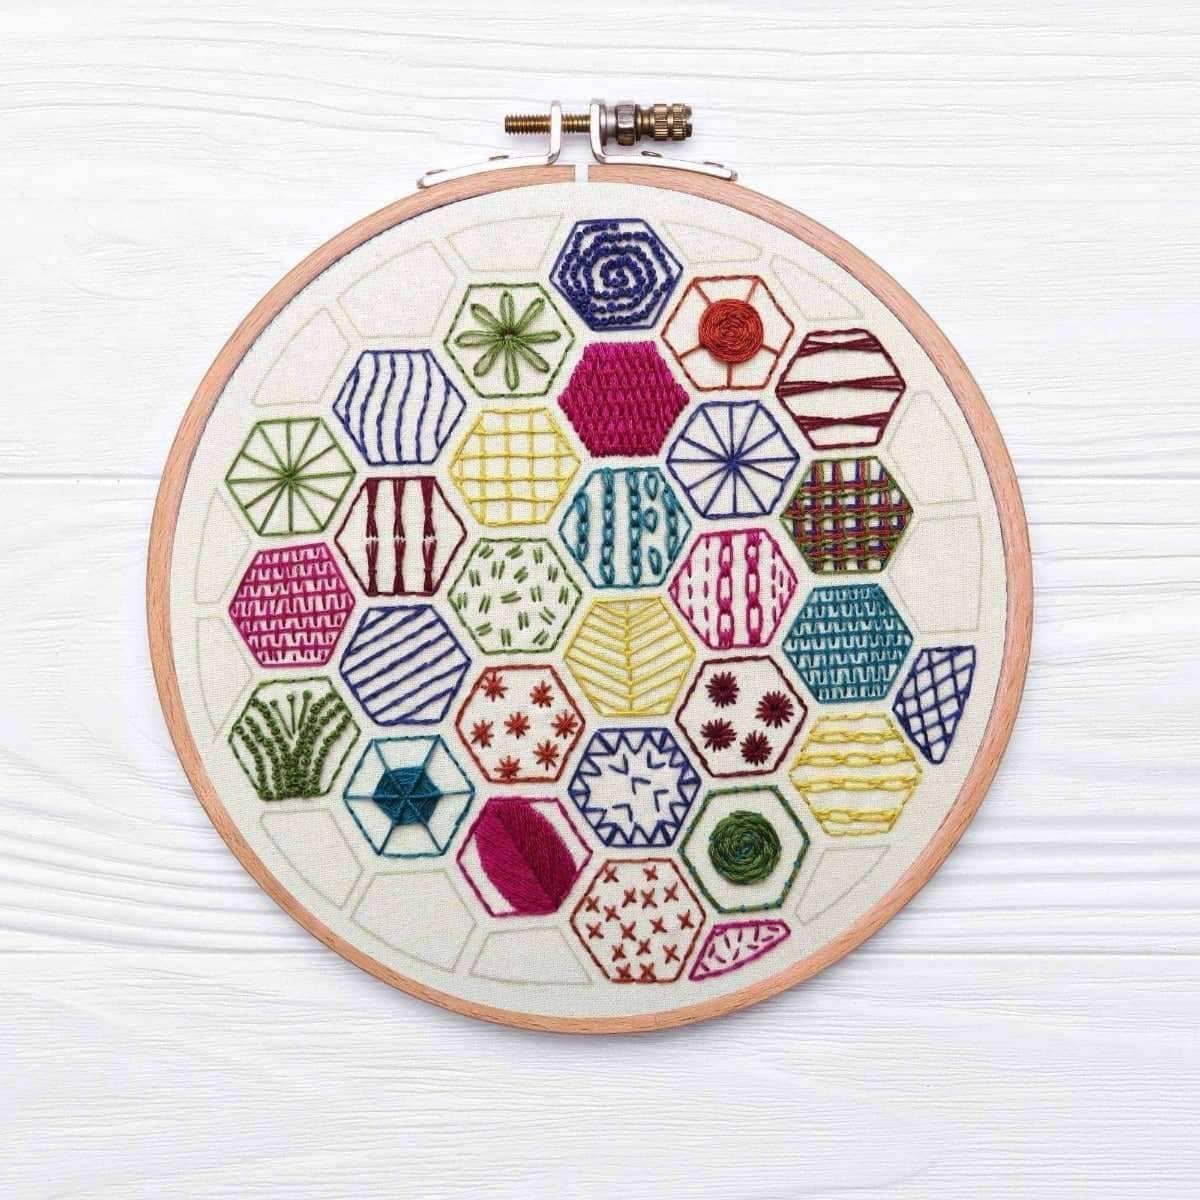 Hexagon Beginner Sampler, Pre Printed Embroidery Fabric Panel PLUS PDF Pattern , Pre Printed Fabric Pattern , StitchDoodles , embroidery hoop kit, Embroidery Kit, embroidery kits for beginners, embroidery pattern, hand embroidery, hand embroidery fabric, PDF pattern, unique embroidery kits , StitchDoodles , shop.stitchdoodles.com